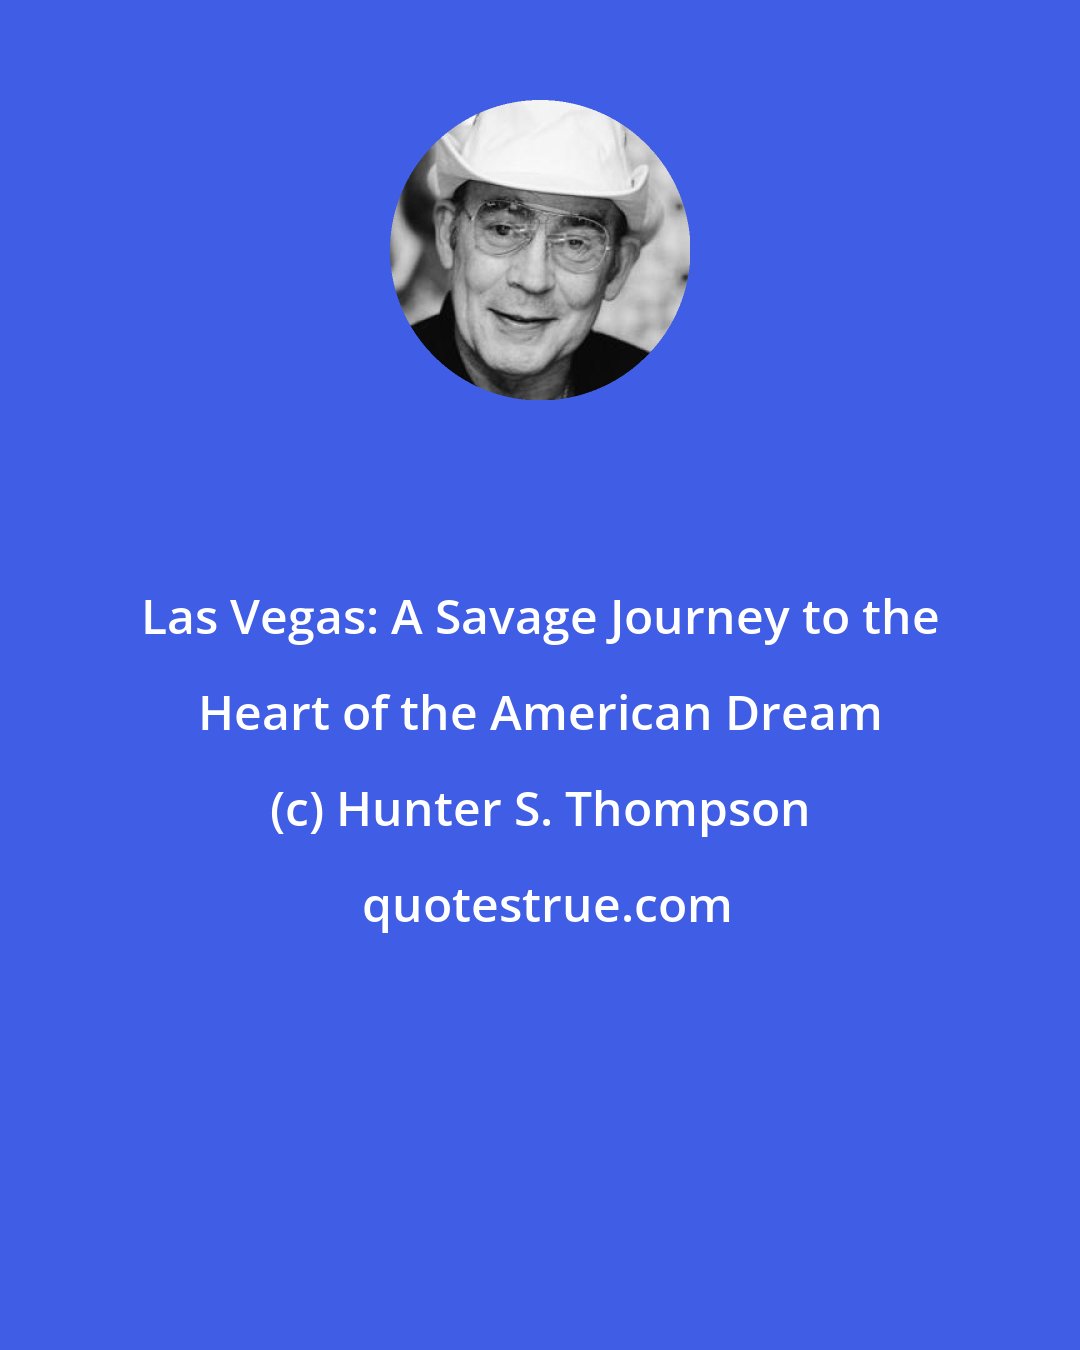 Hunter S. Thompson: Las Vegas: A Savage Journey to the Heart of the American Dream